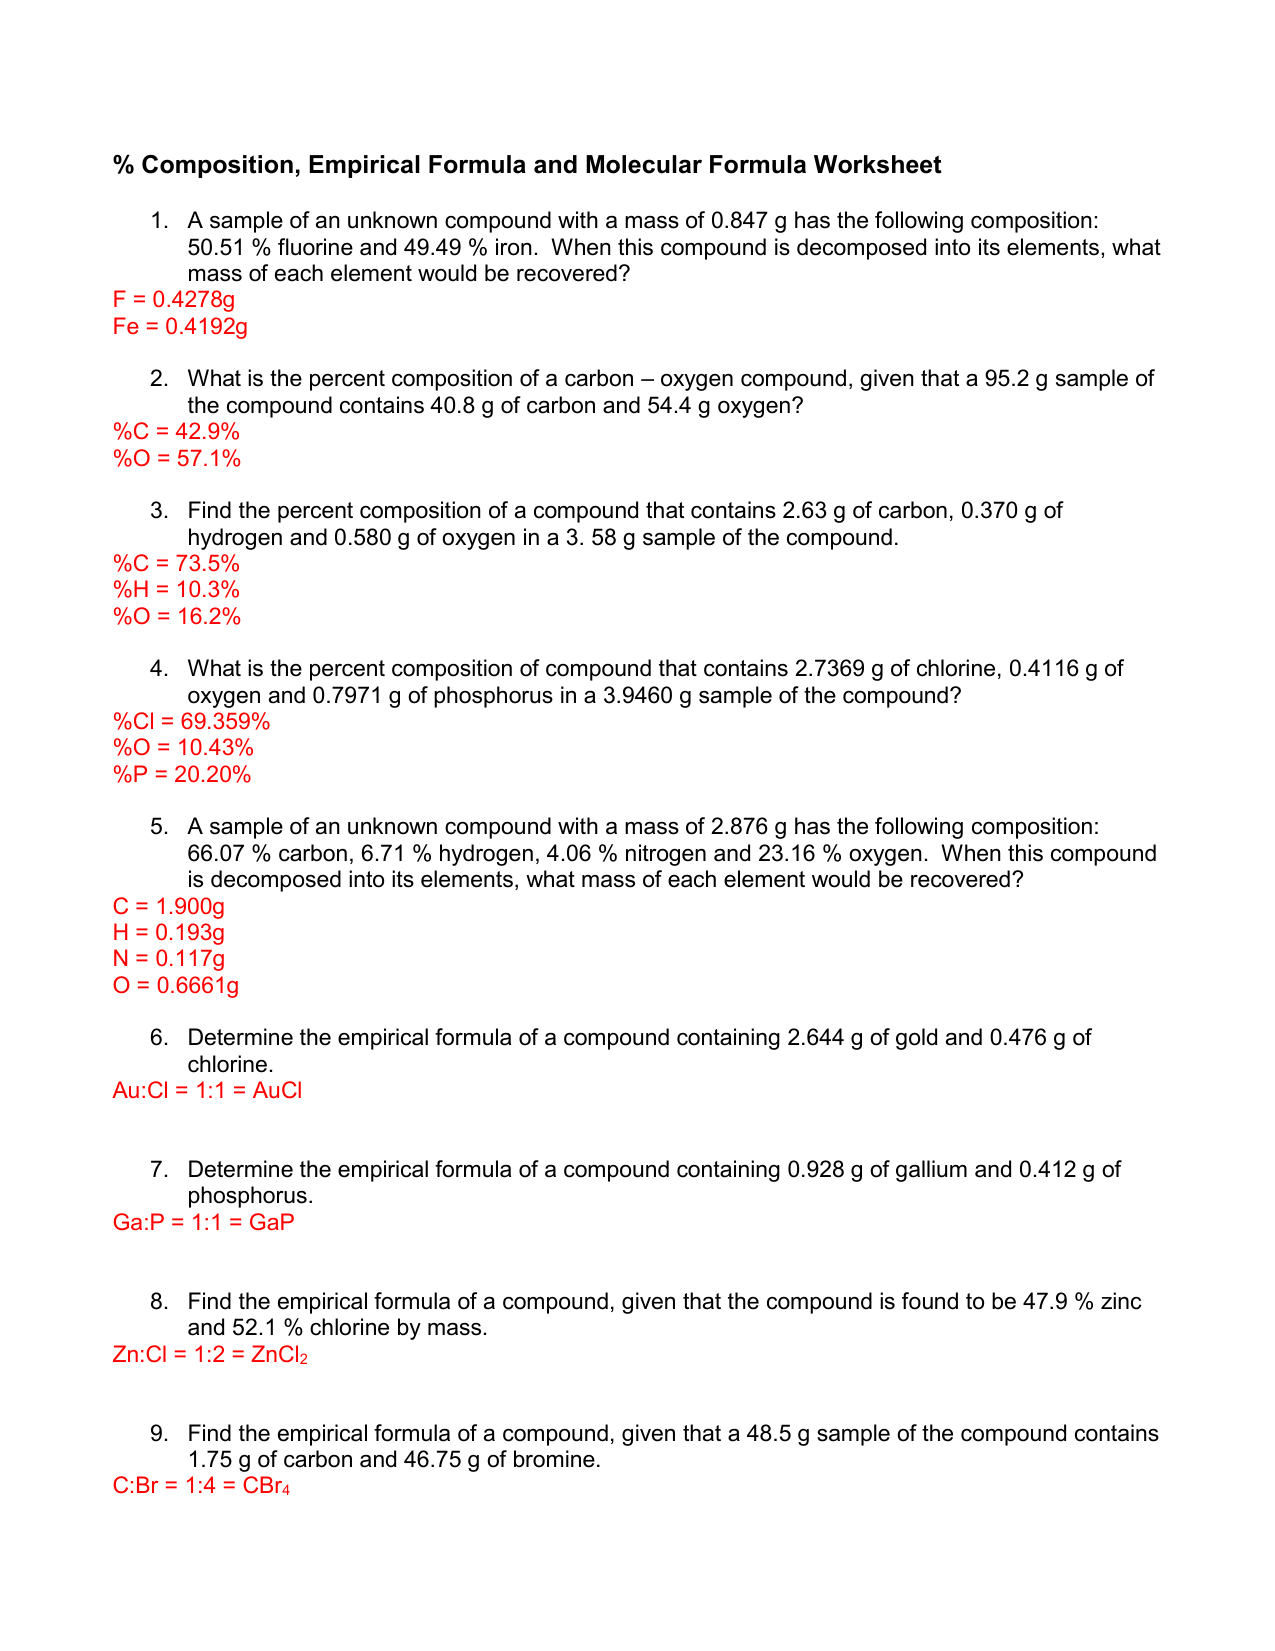 comp empirical and molecular worksheet -answer key With Percent Composition Worksheet Answers